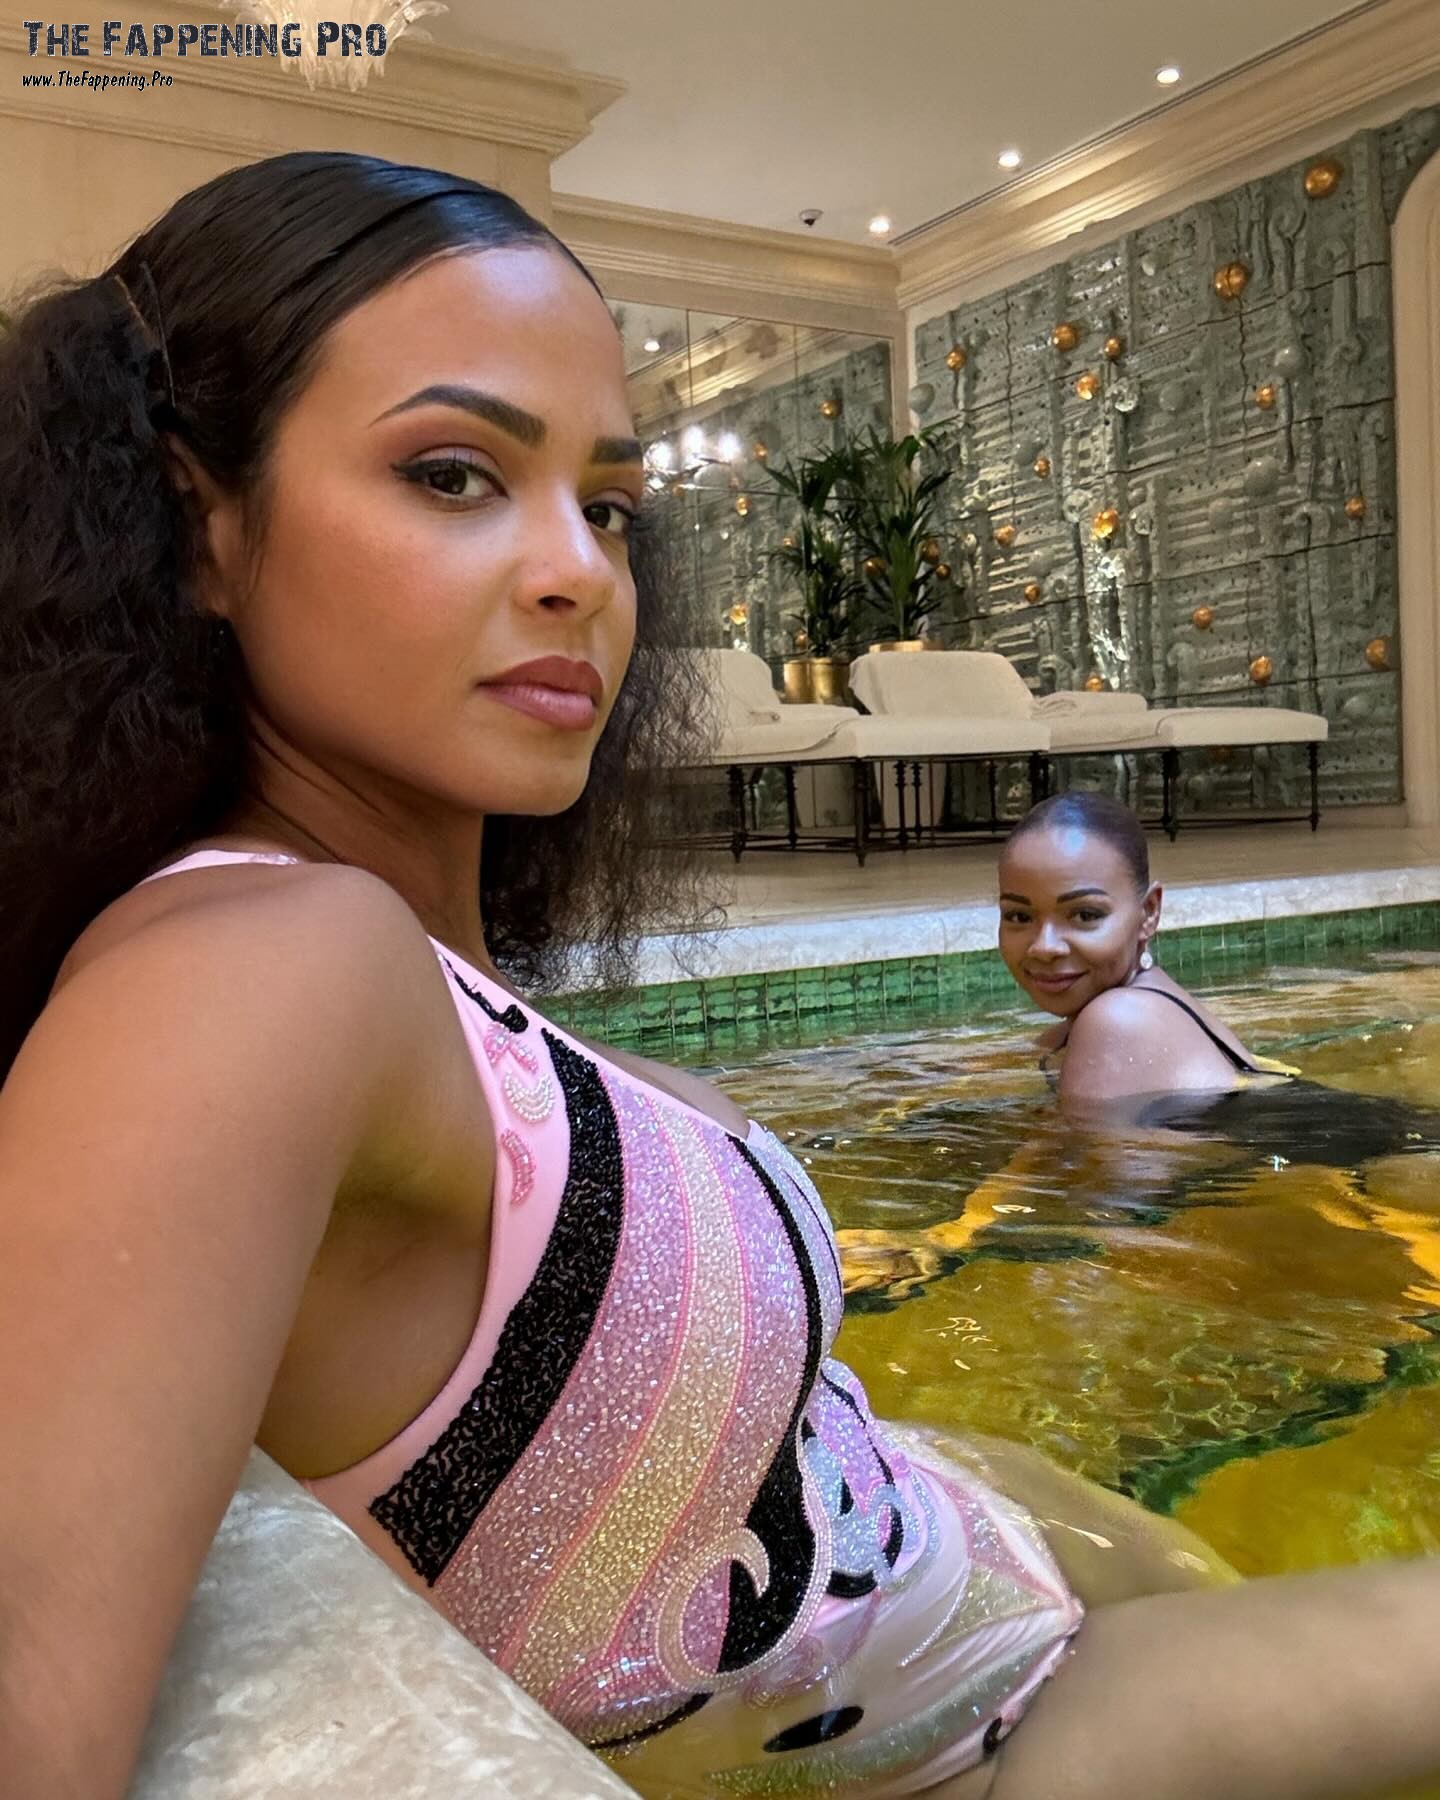 Embark on a journey with Christina Milian as she tantalizes fans with jaw-dropping bikini photos from a glamorous golden pool. While the shots may seem promotional, Christina is simply living her best life on vacation at the luxurious Hôtel de Crillon. At 42 years young, the Jersey singer is stunning in her swimsuit, offering fans a peek into her New Year's celebrations. Get ready to be captivated by Christina Milian's sexy bikini photos, sure to leave you craving for more!